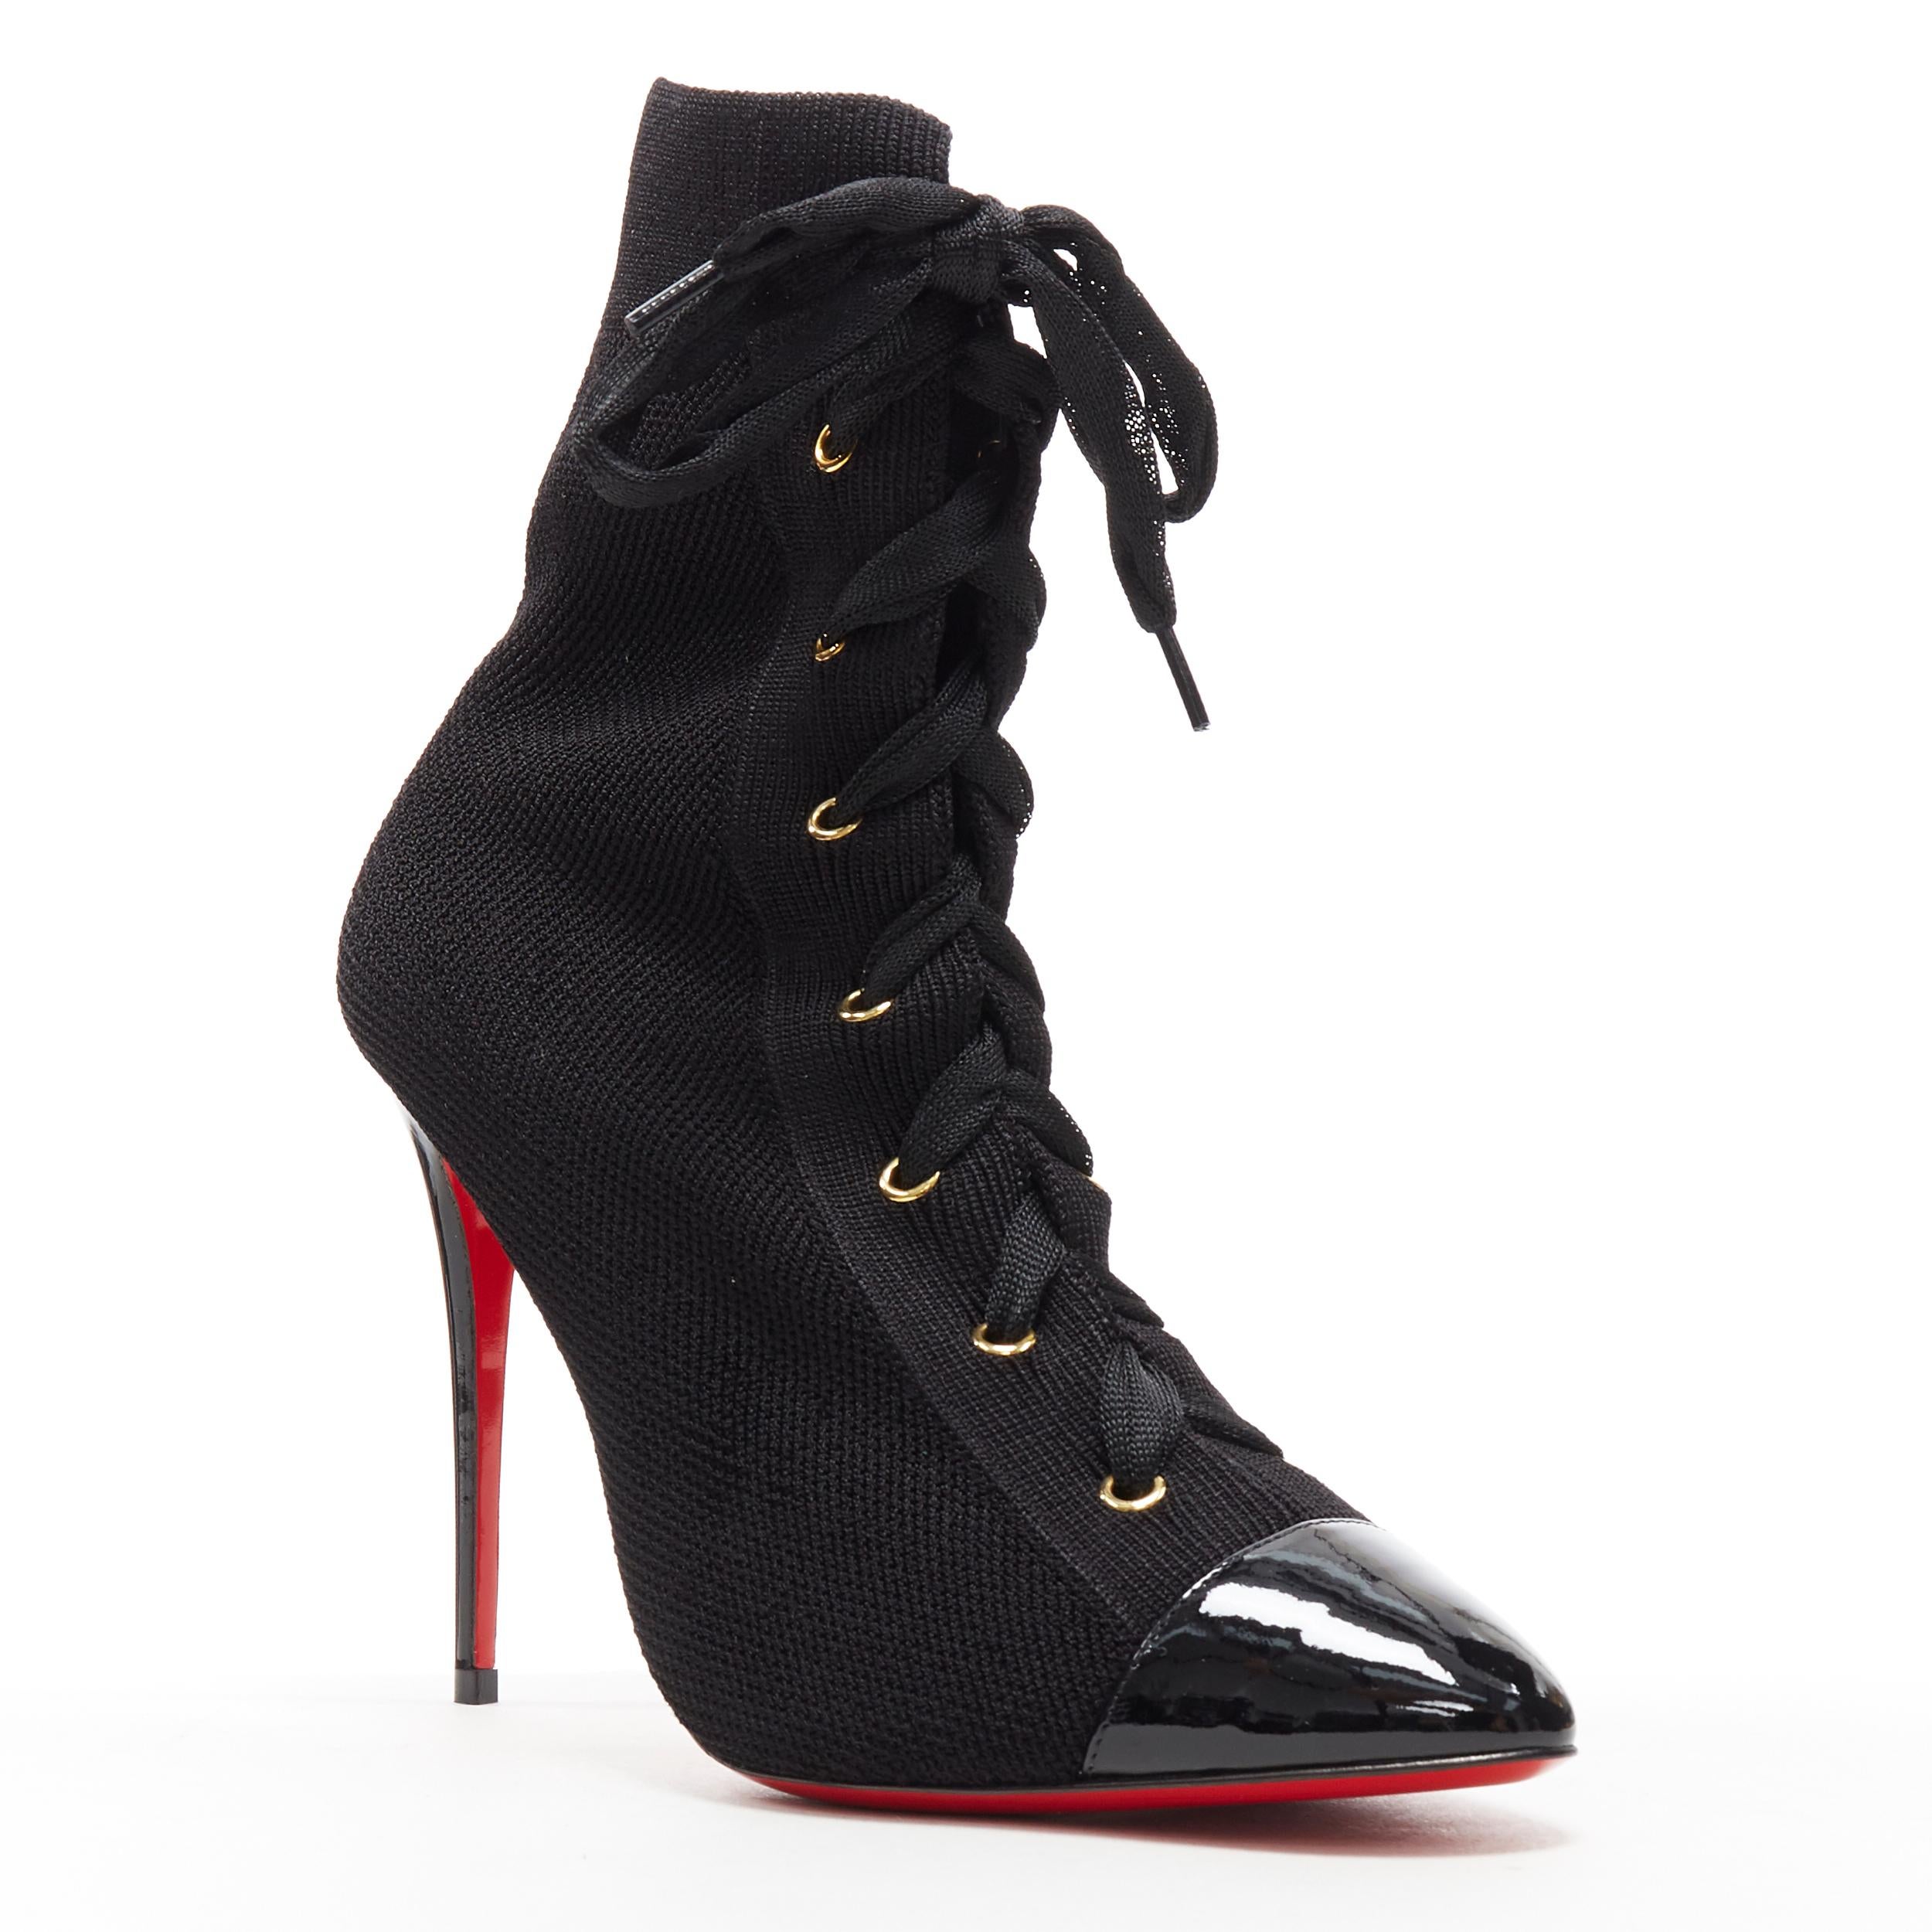 new CHRISTIAN LOUBOUTIN Frenchie 100 black lace up stretch knit sock boot EU37
Brand: Christian Louboutin
Designer: Christian Louboutin
Model Name / Style: Frenchie 100
Material: Fabric
Color: Black
Pattern: Solid
Closure: Lace up
Extra Detail: